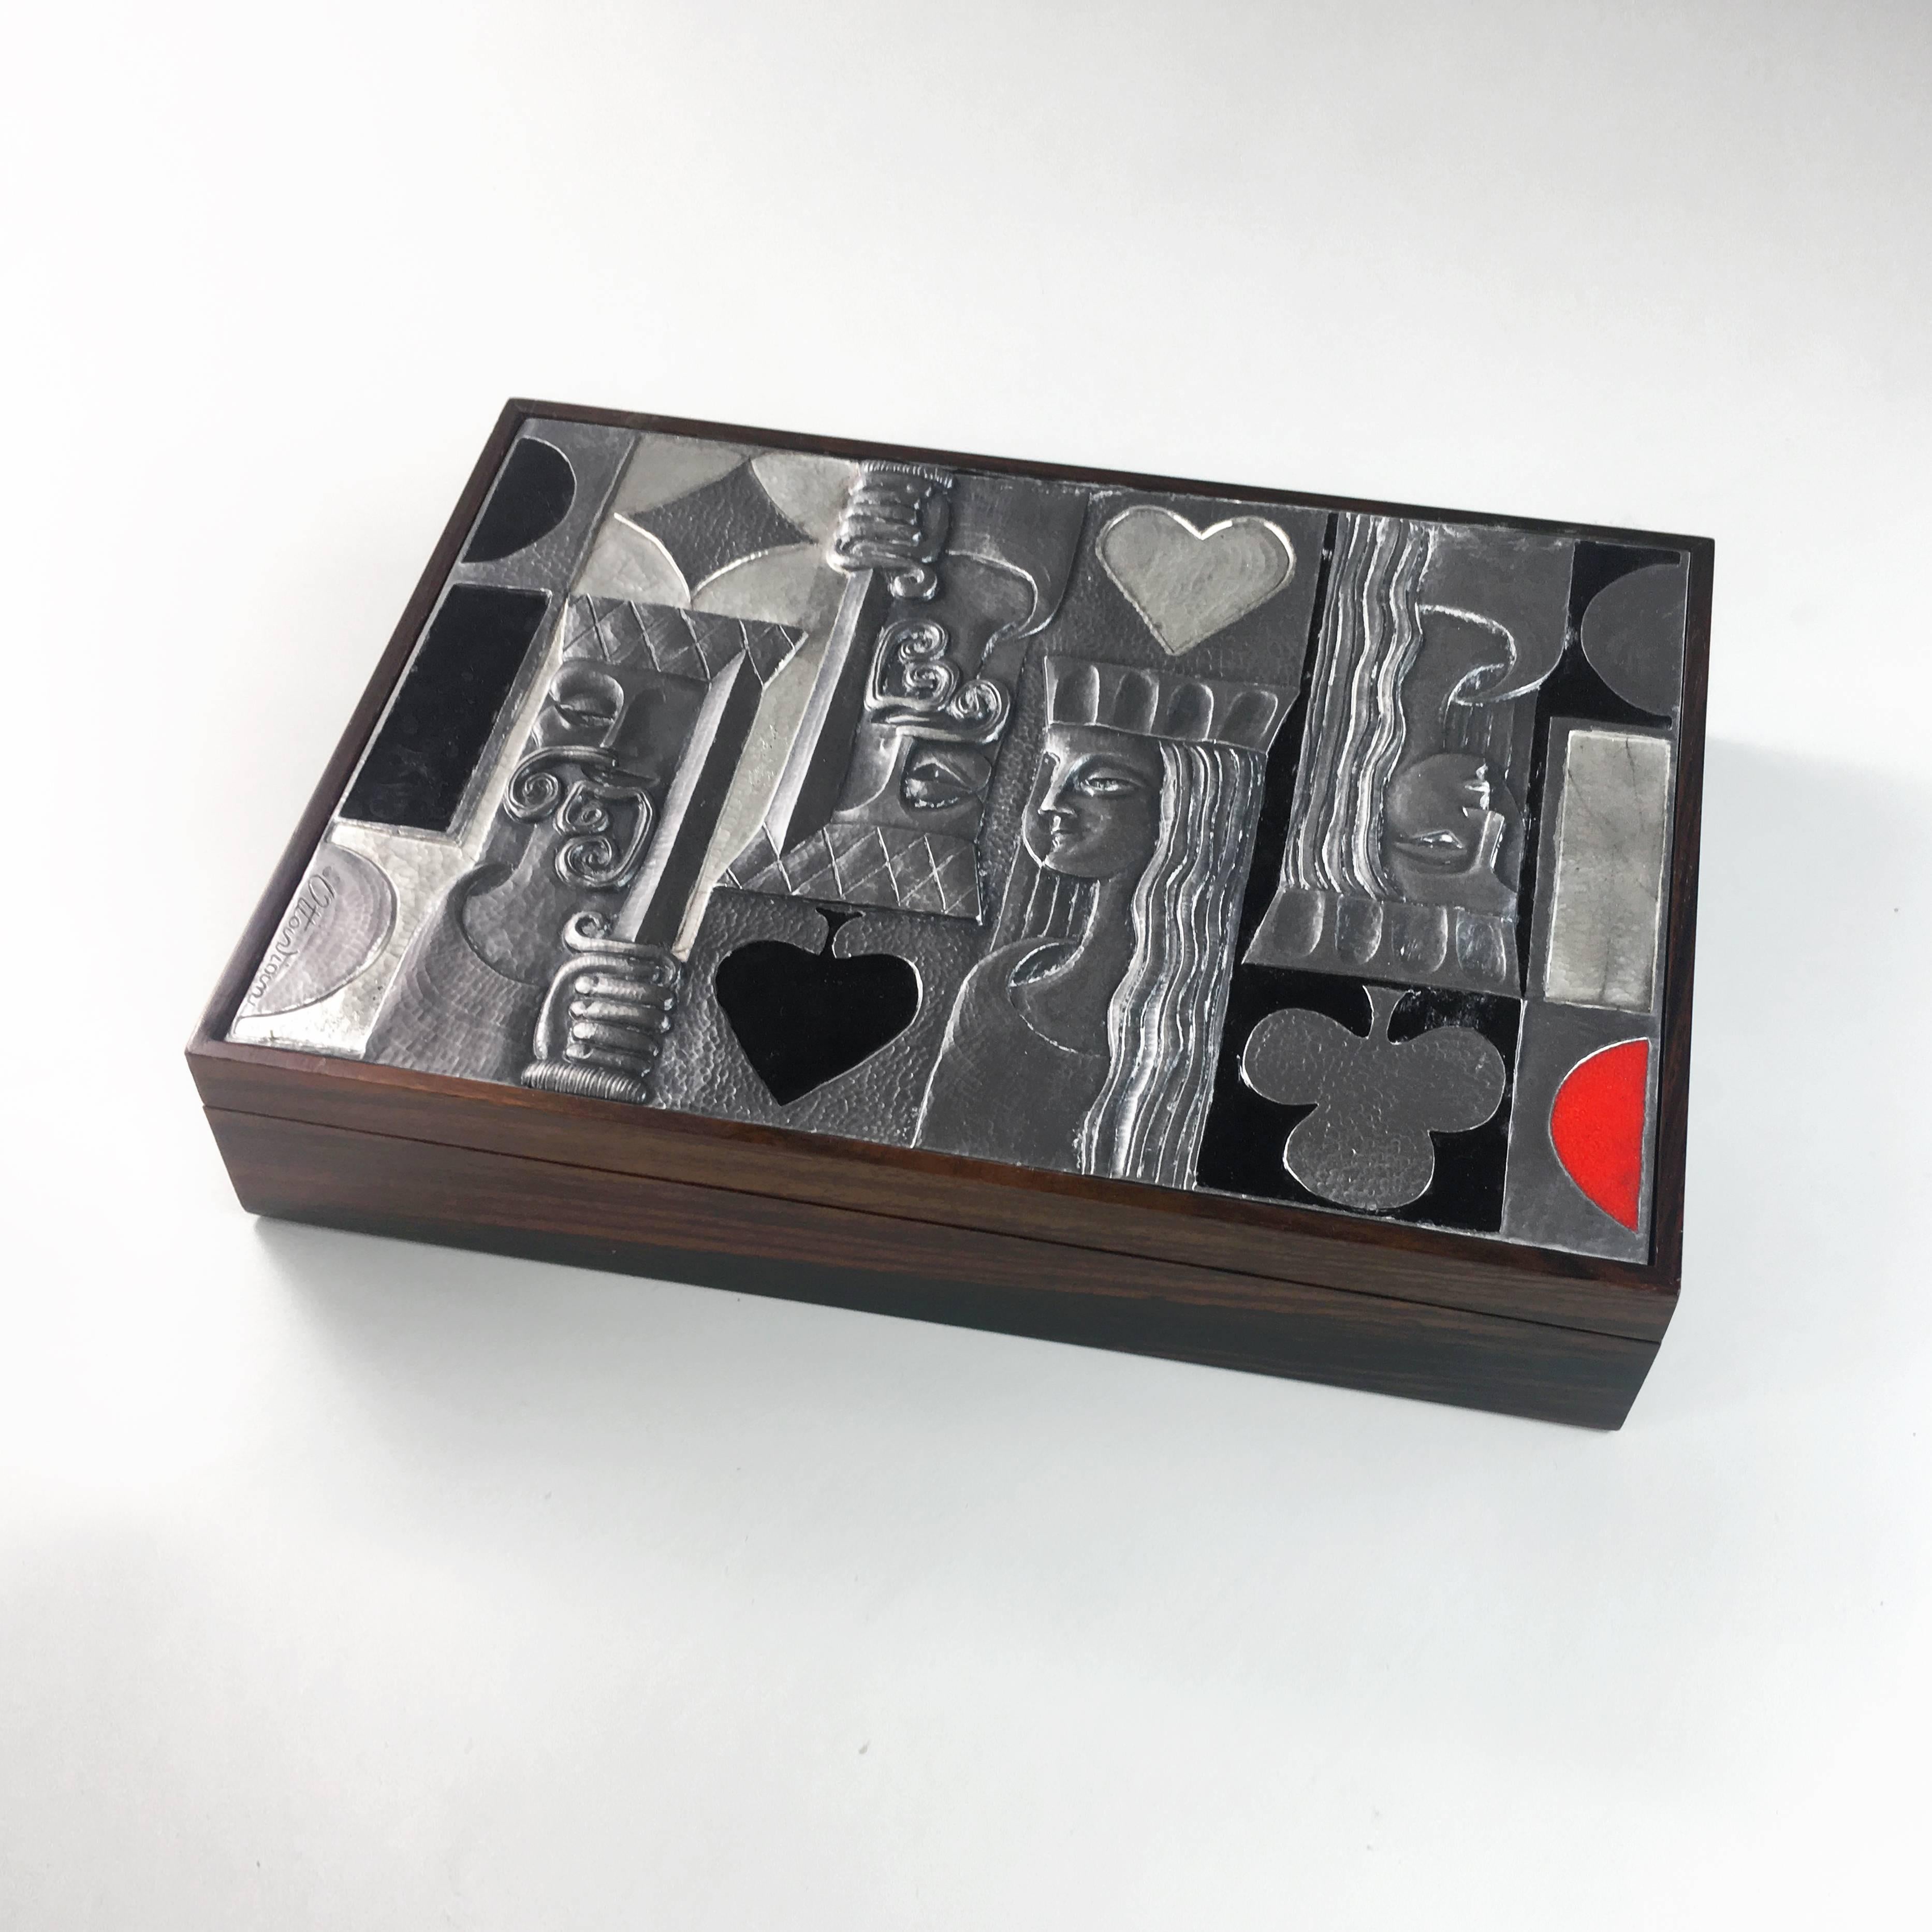 Wooden game box with enameled silver top produced and marked by Ottaviani, Italy. Includes original game items.
 